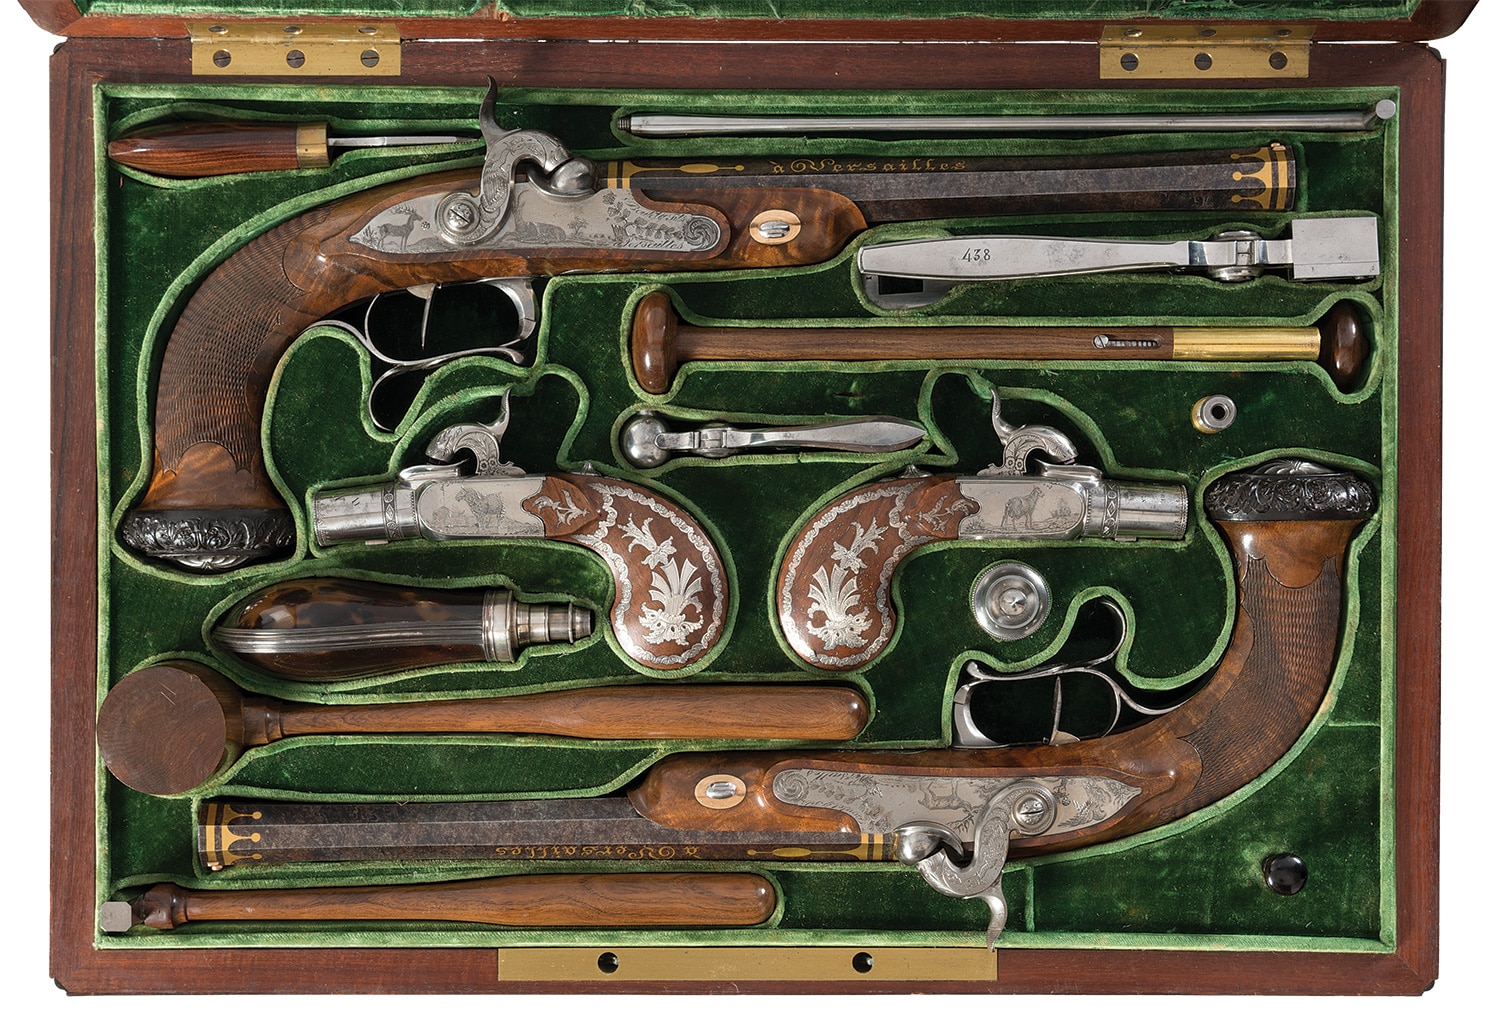 Exhibition Quality Gold Inlaid and Engraved Cased Four Gun Garniture by Renowned Maker Nicolas Noel Boutet